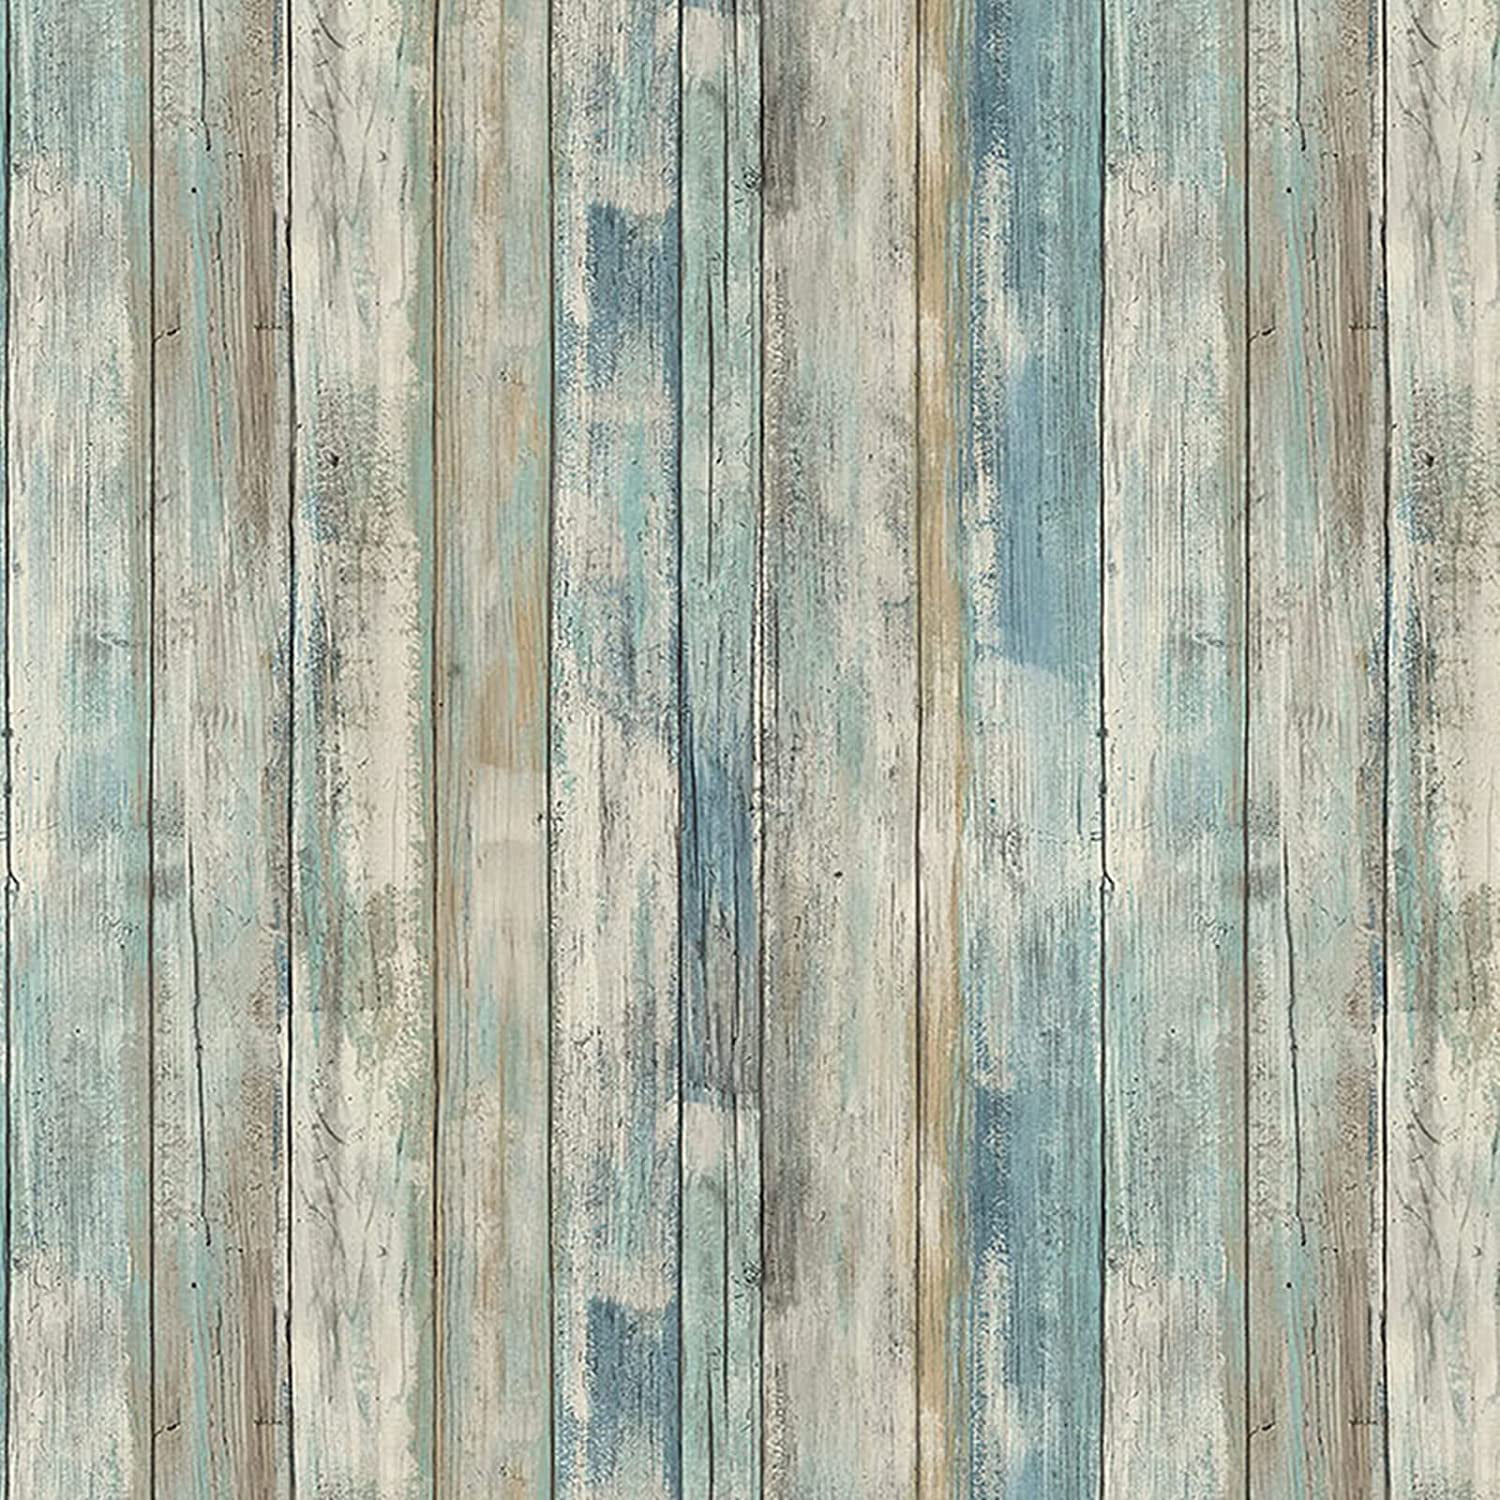 Caltero Wood Plank Wallpaper 17.7 × 197 Blue Distressed Wood Wallpaper Peel and Stick Wood Grain Contact Paper Vintage for Furniture Bedroom Countertop Cabinet